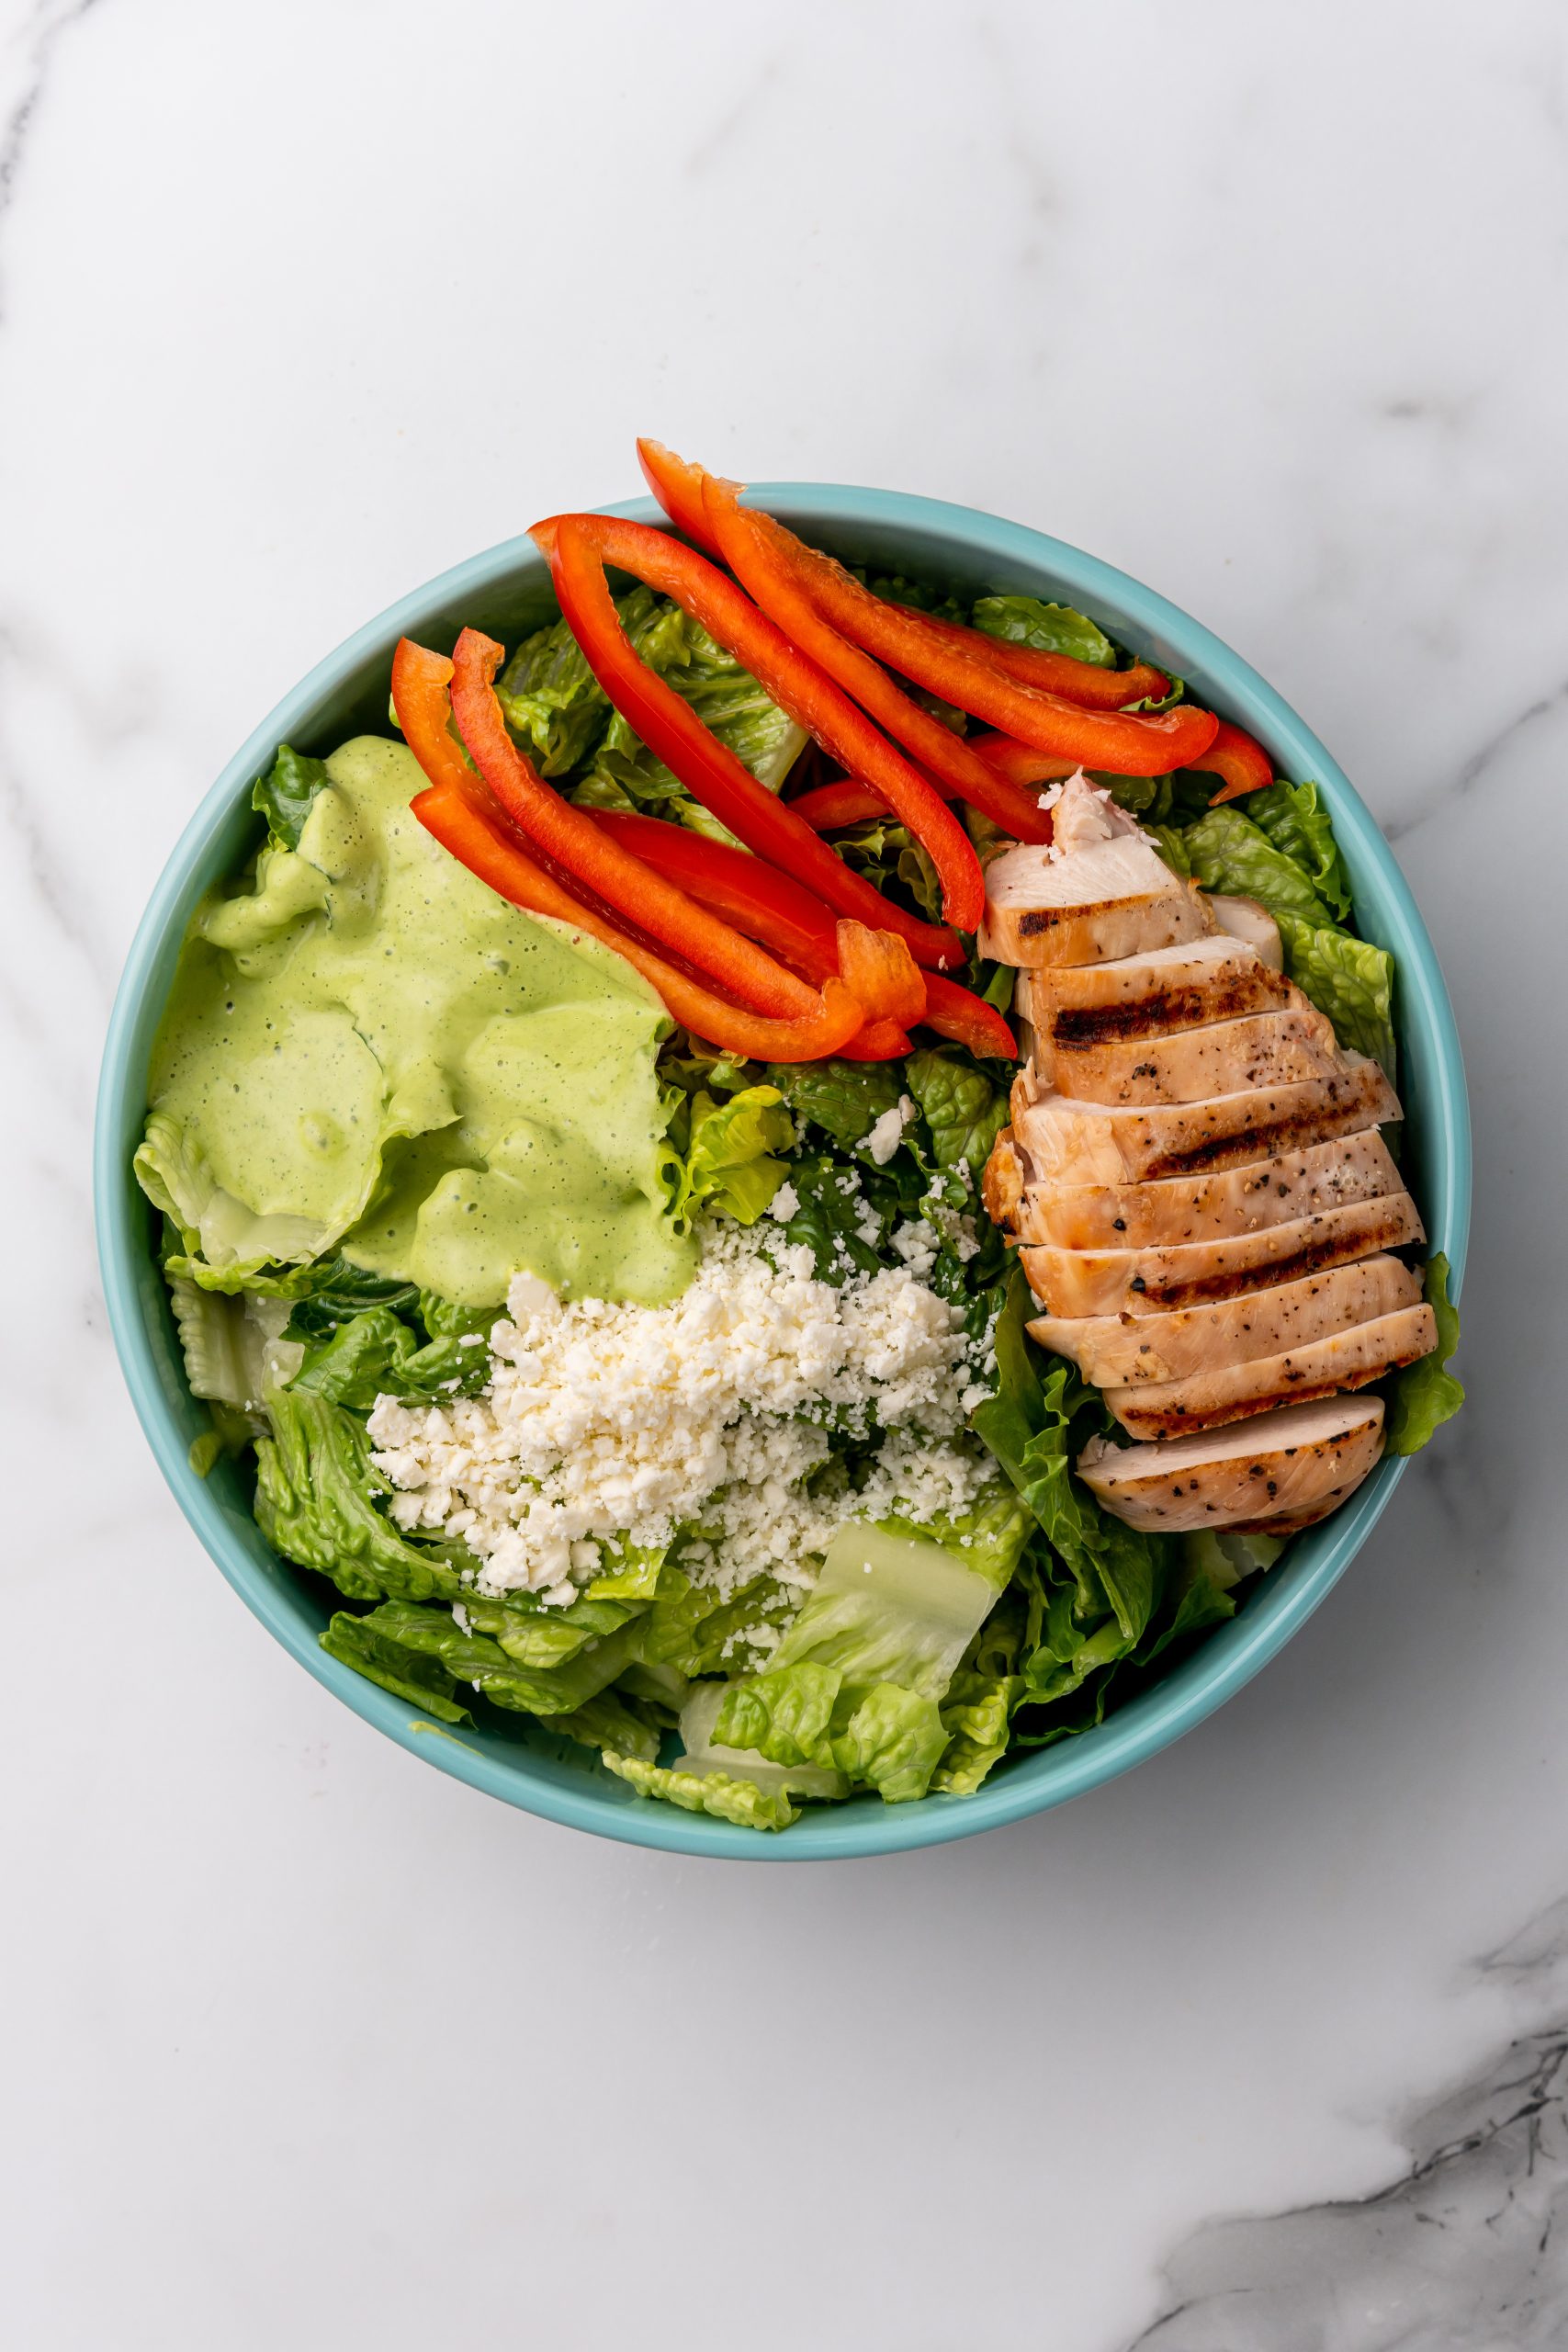 Mexican caesar salad ingredients in a shallow blue bowl